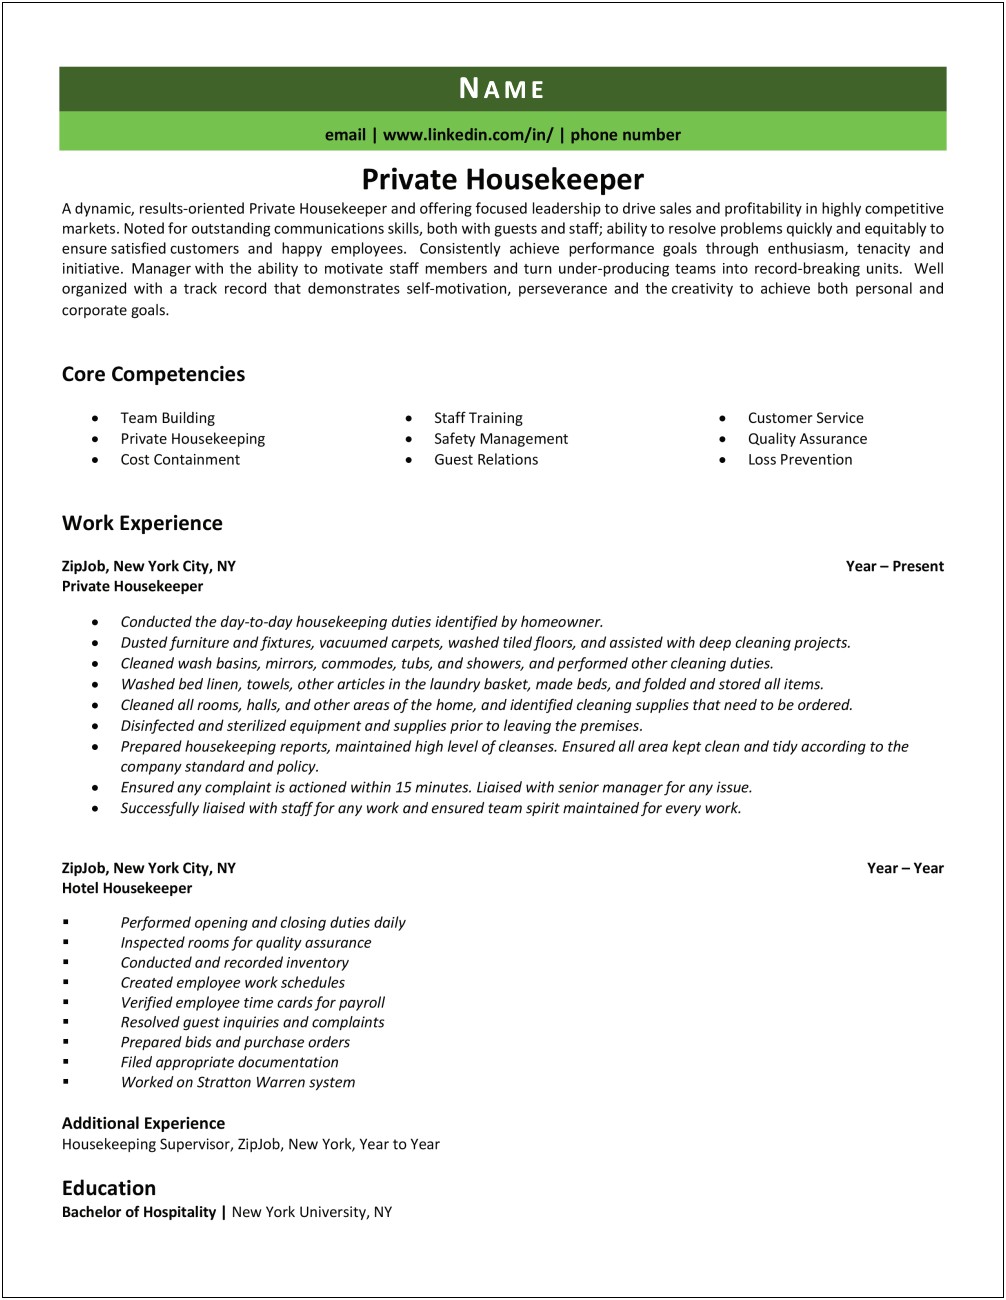 Sample Of Resume For House Keeper